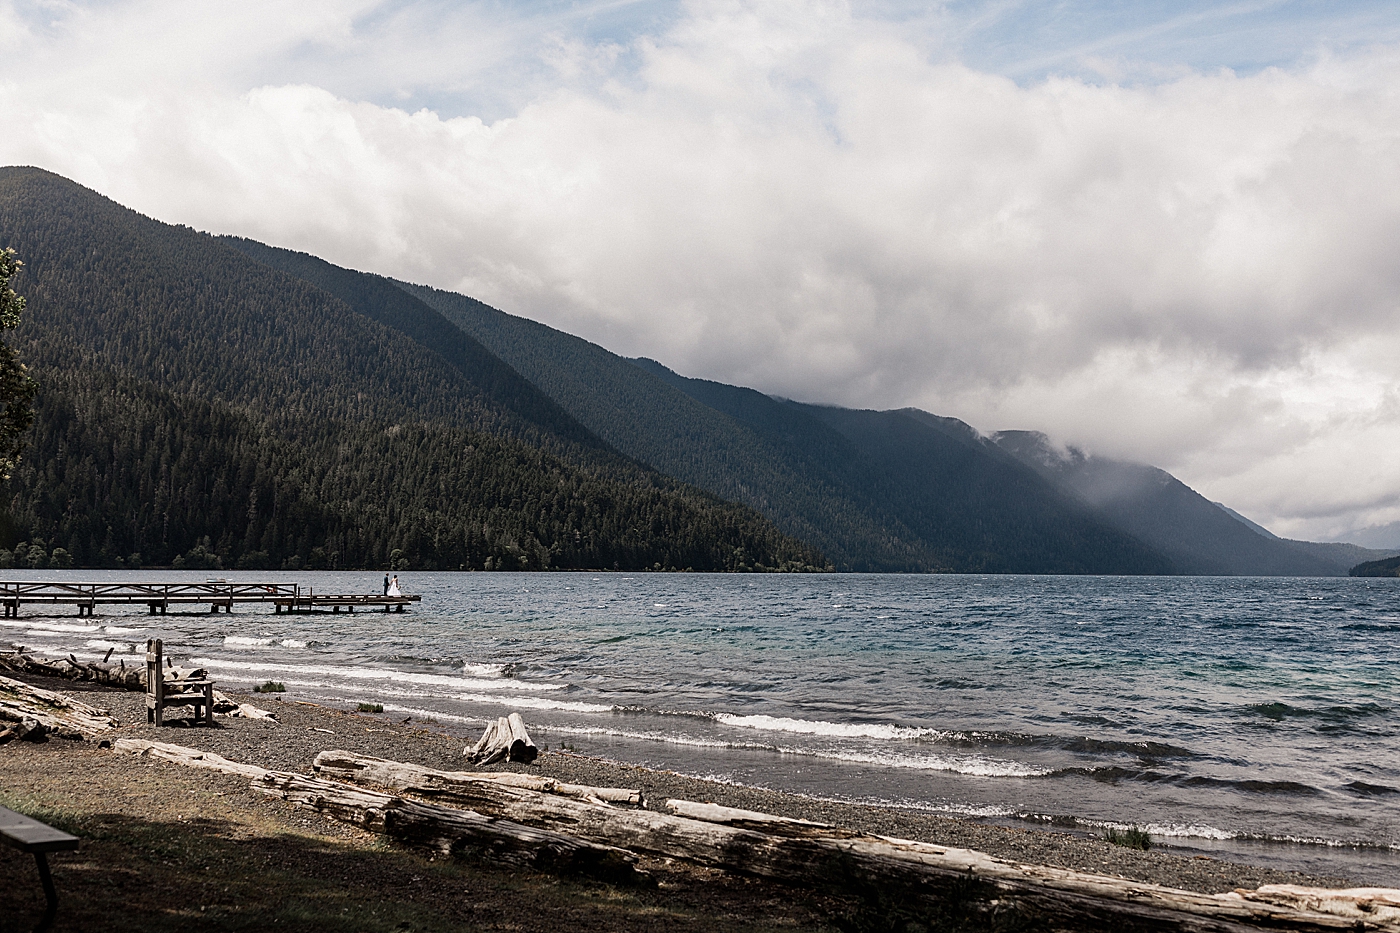 Bride and groom elopement photos at Lake Crescent in the Olympic National Park | Megan Montalvo Photography